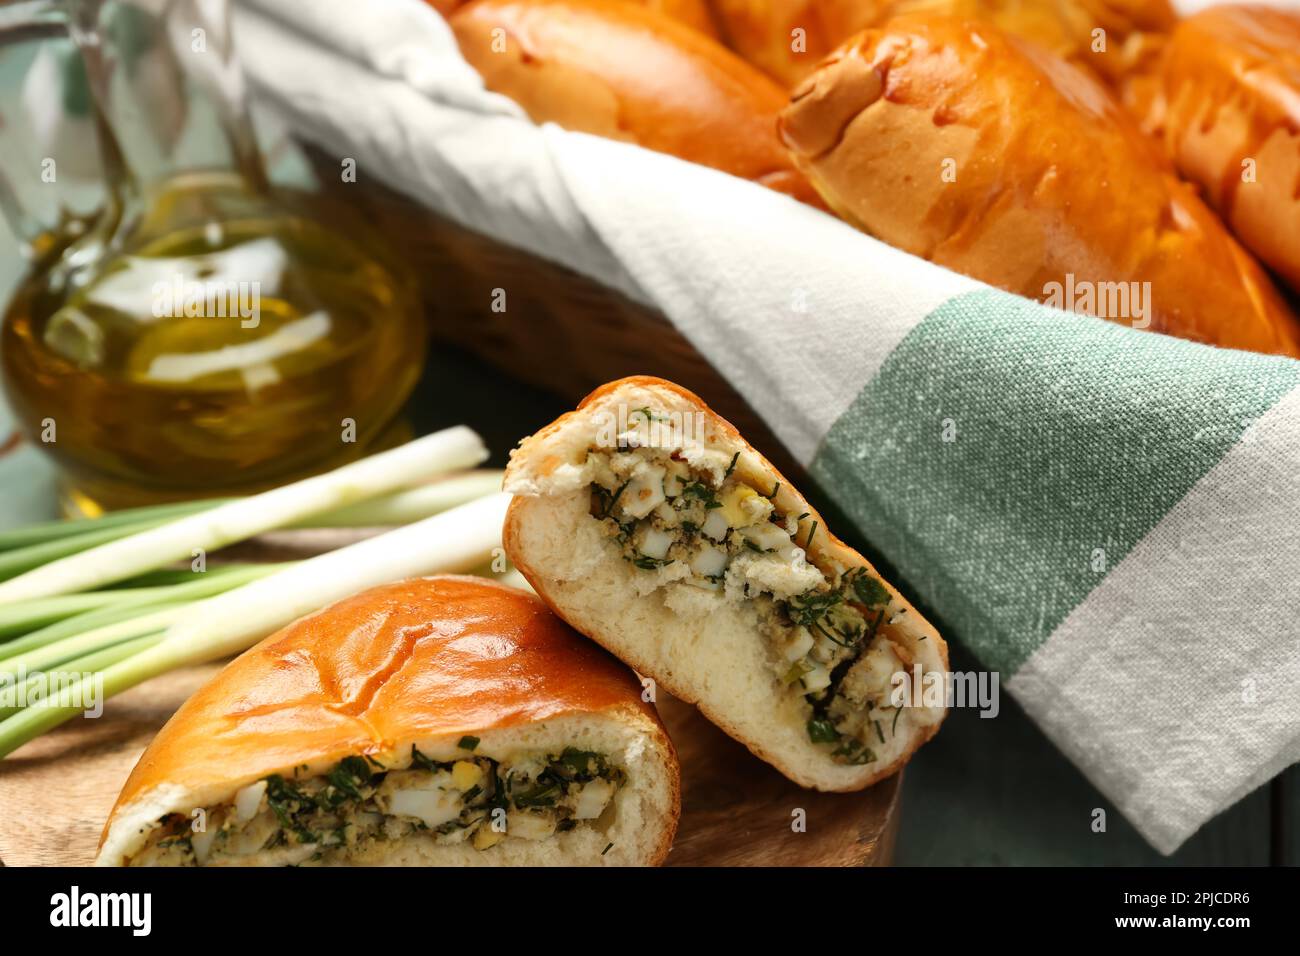 Delicious baked patties with eggs, closeup view Stock Photo